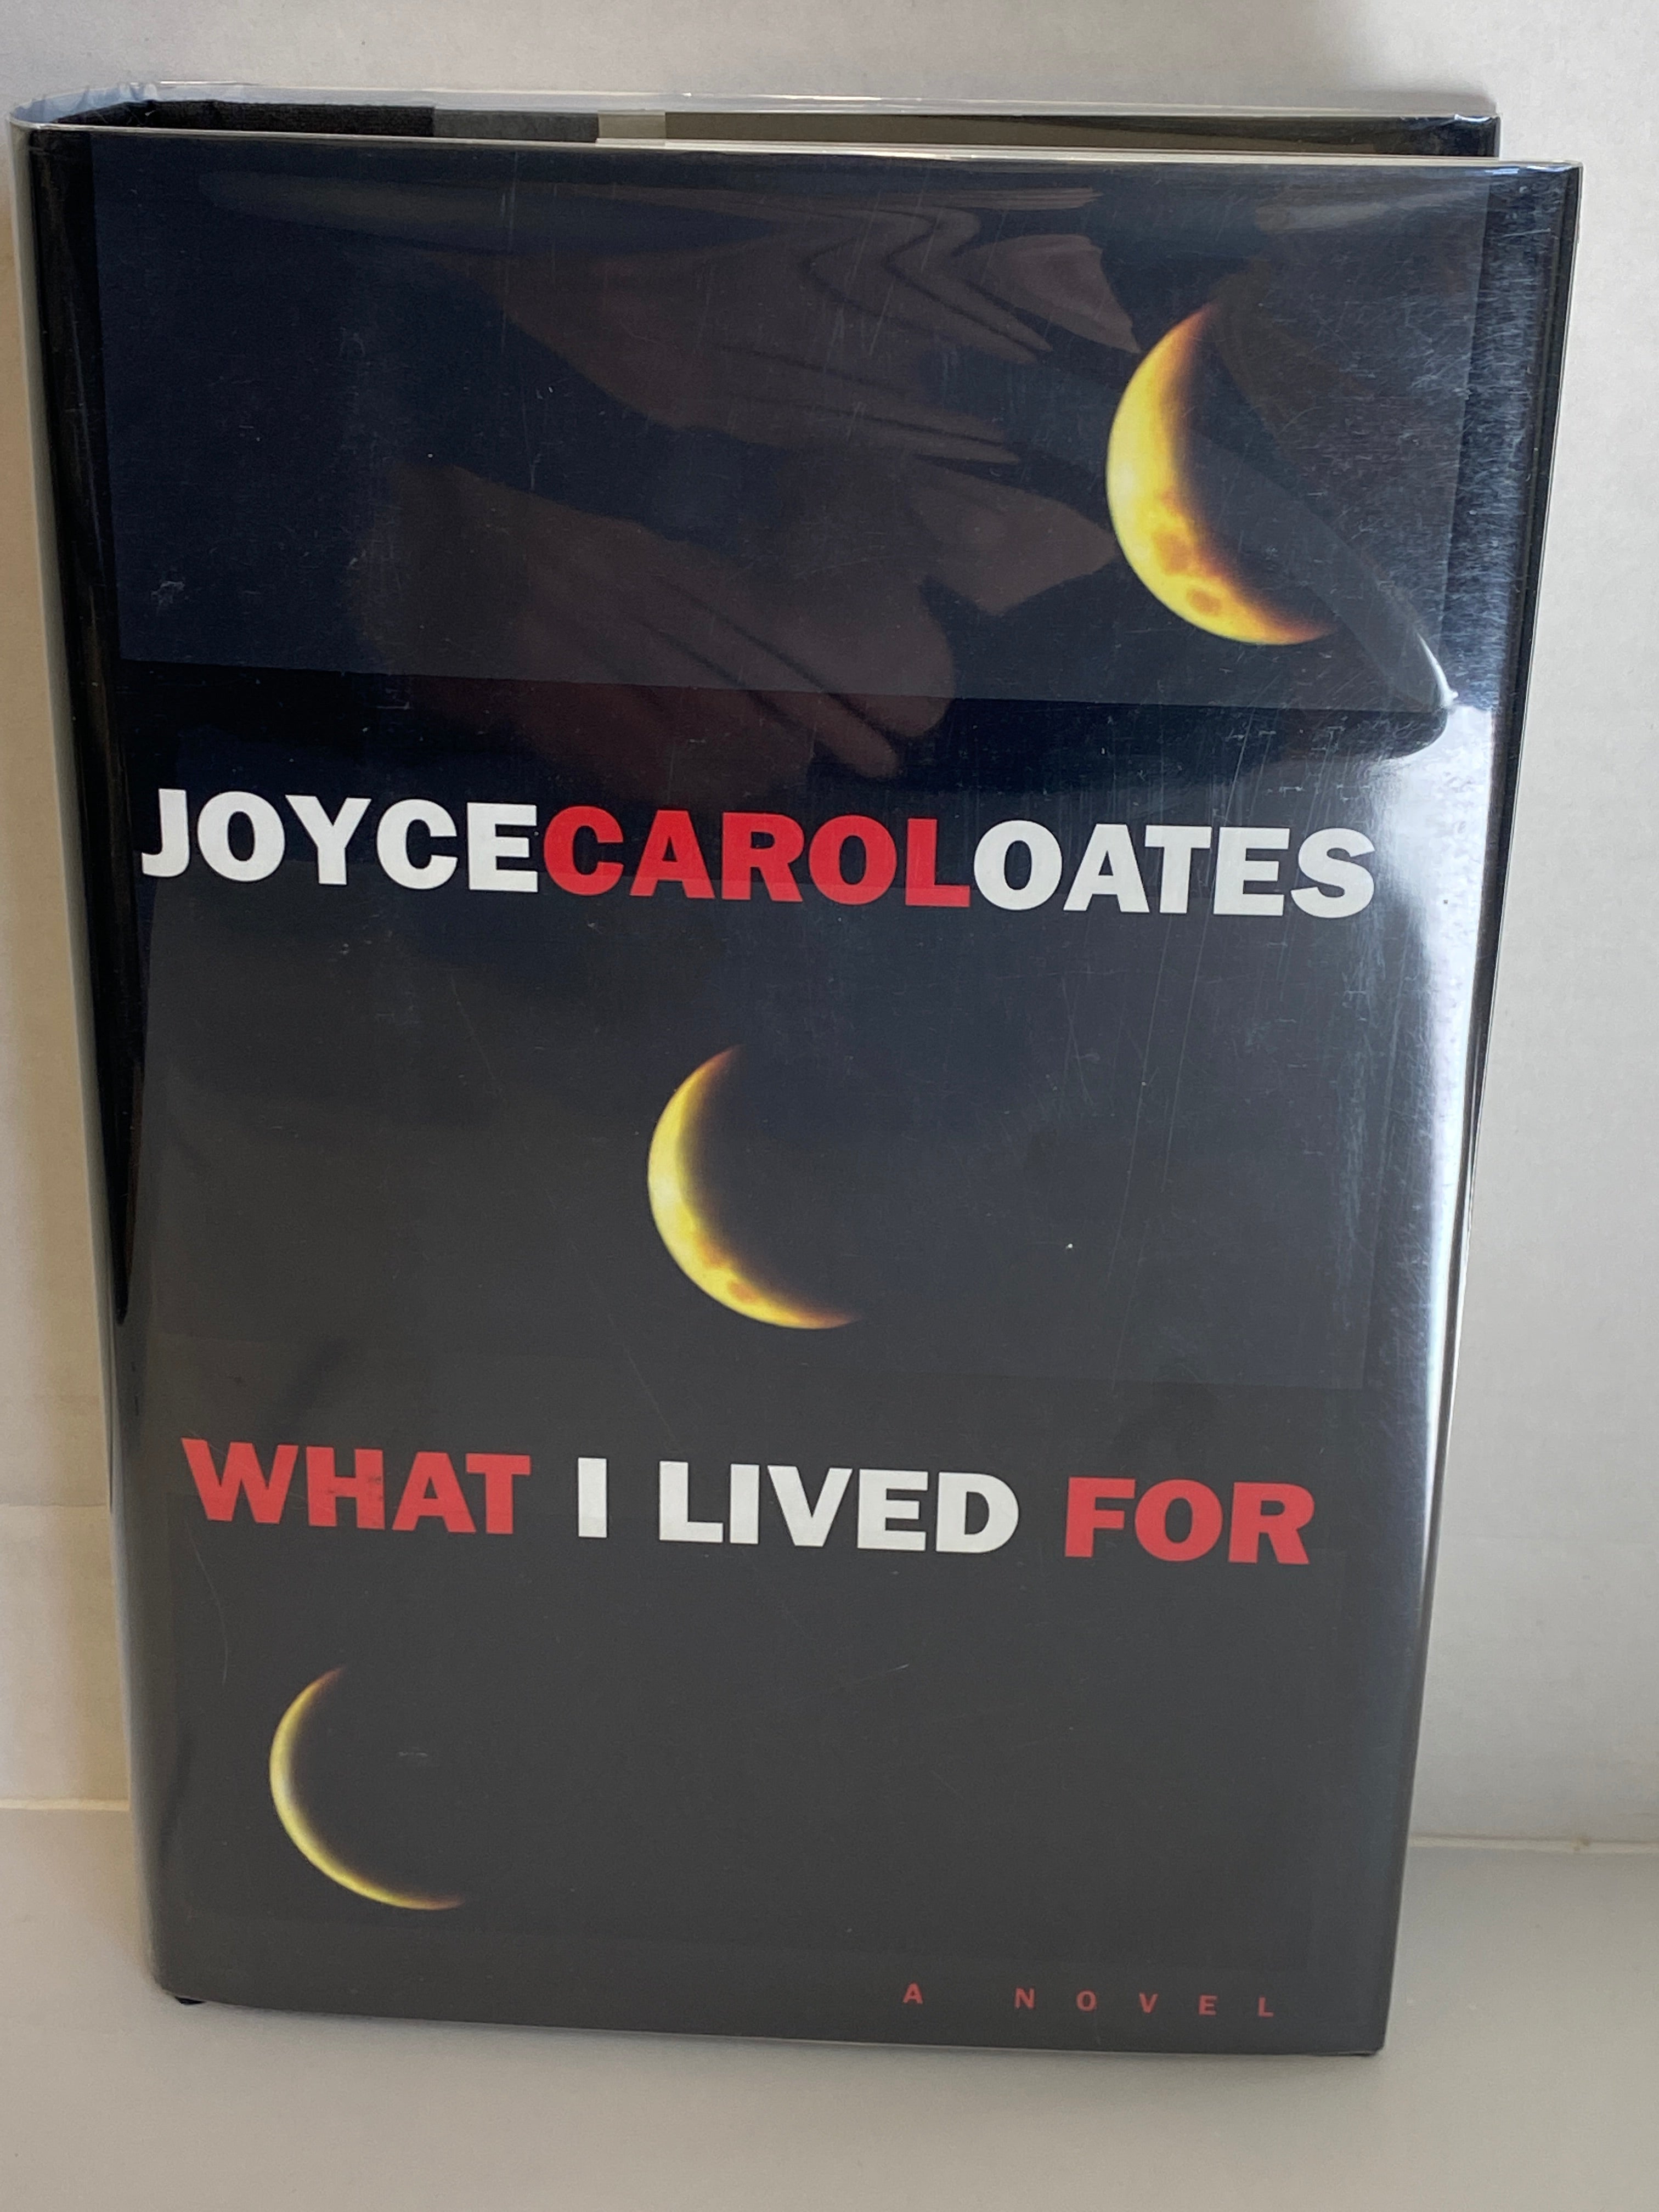 Joyce Carol Oates Lot of 15 First Editions 3 Signed 1989-2005